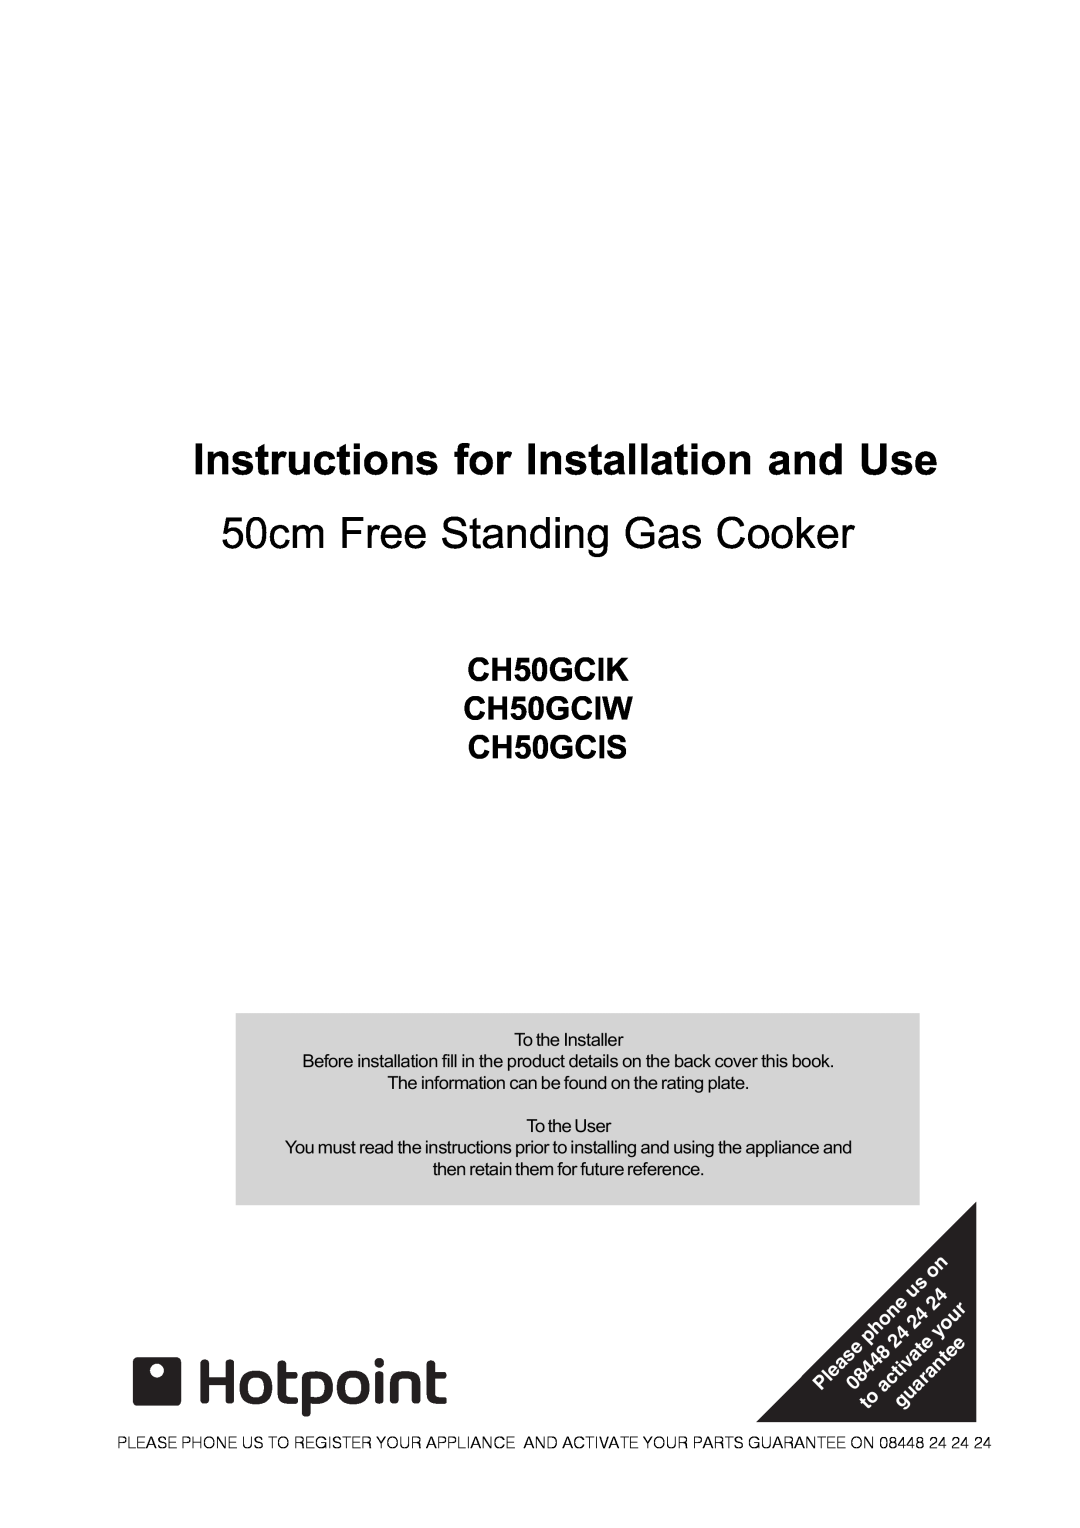 Hotpoint manual Instructions for Installation and Use, 50cm Free Standing Gas Cooker, CH50GCIK CH50GCIW CH50GCIS 